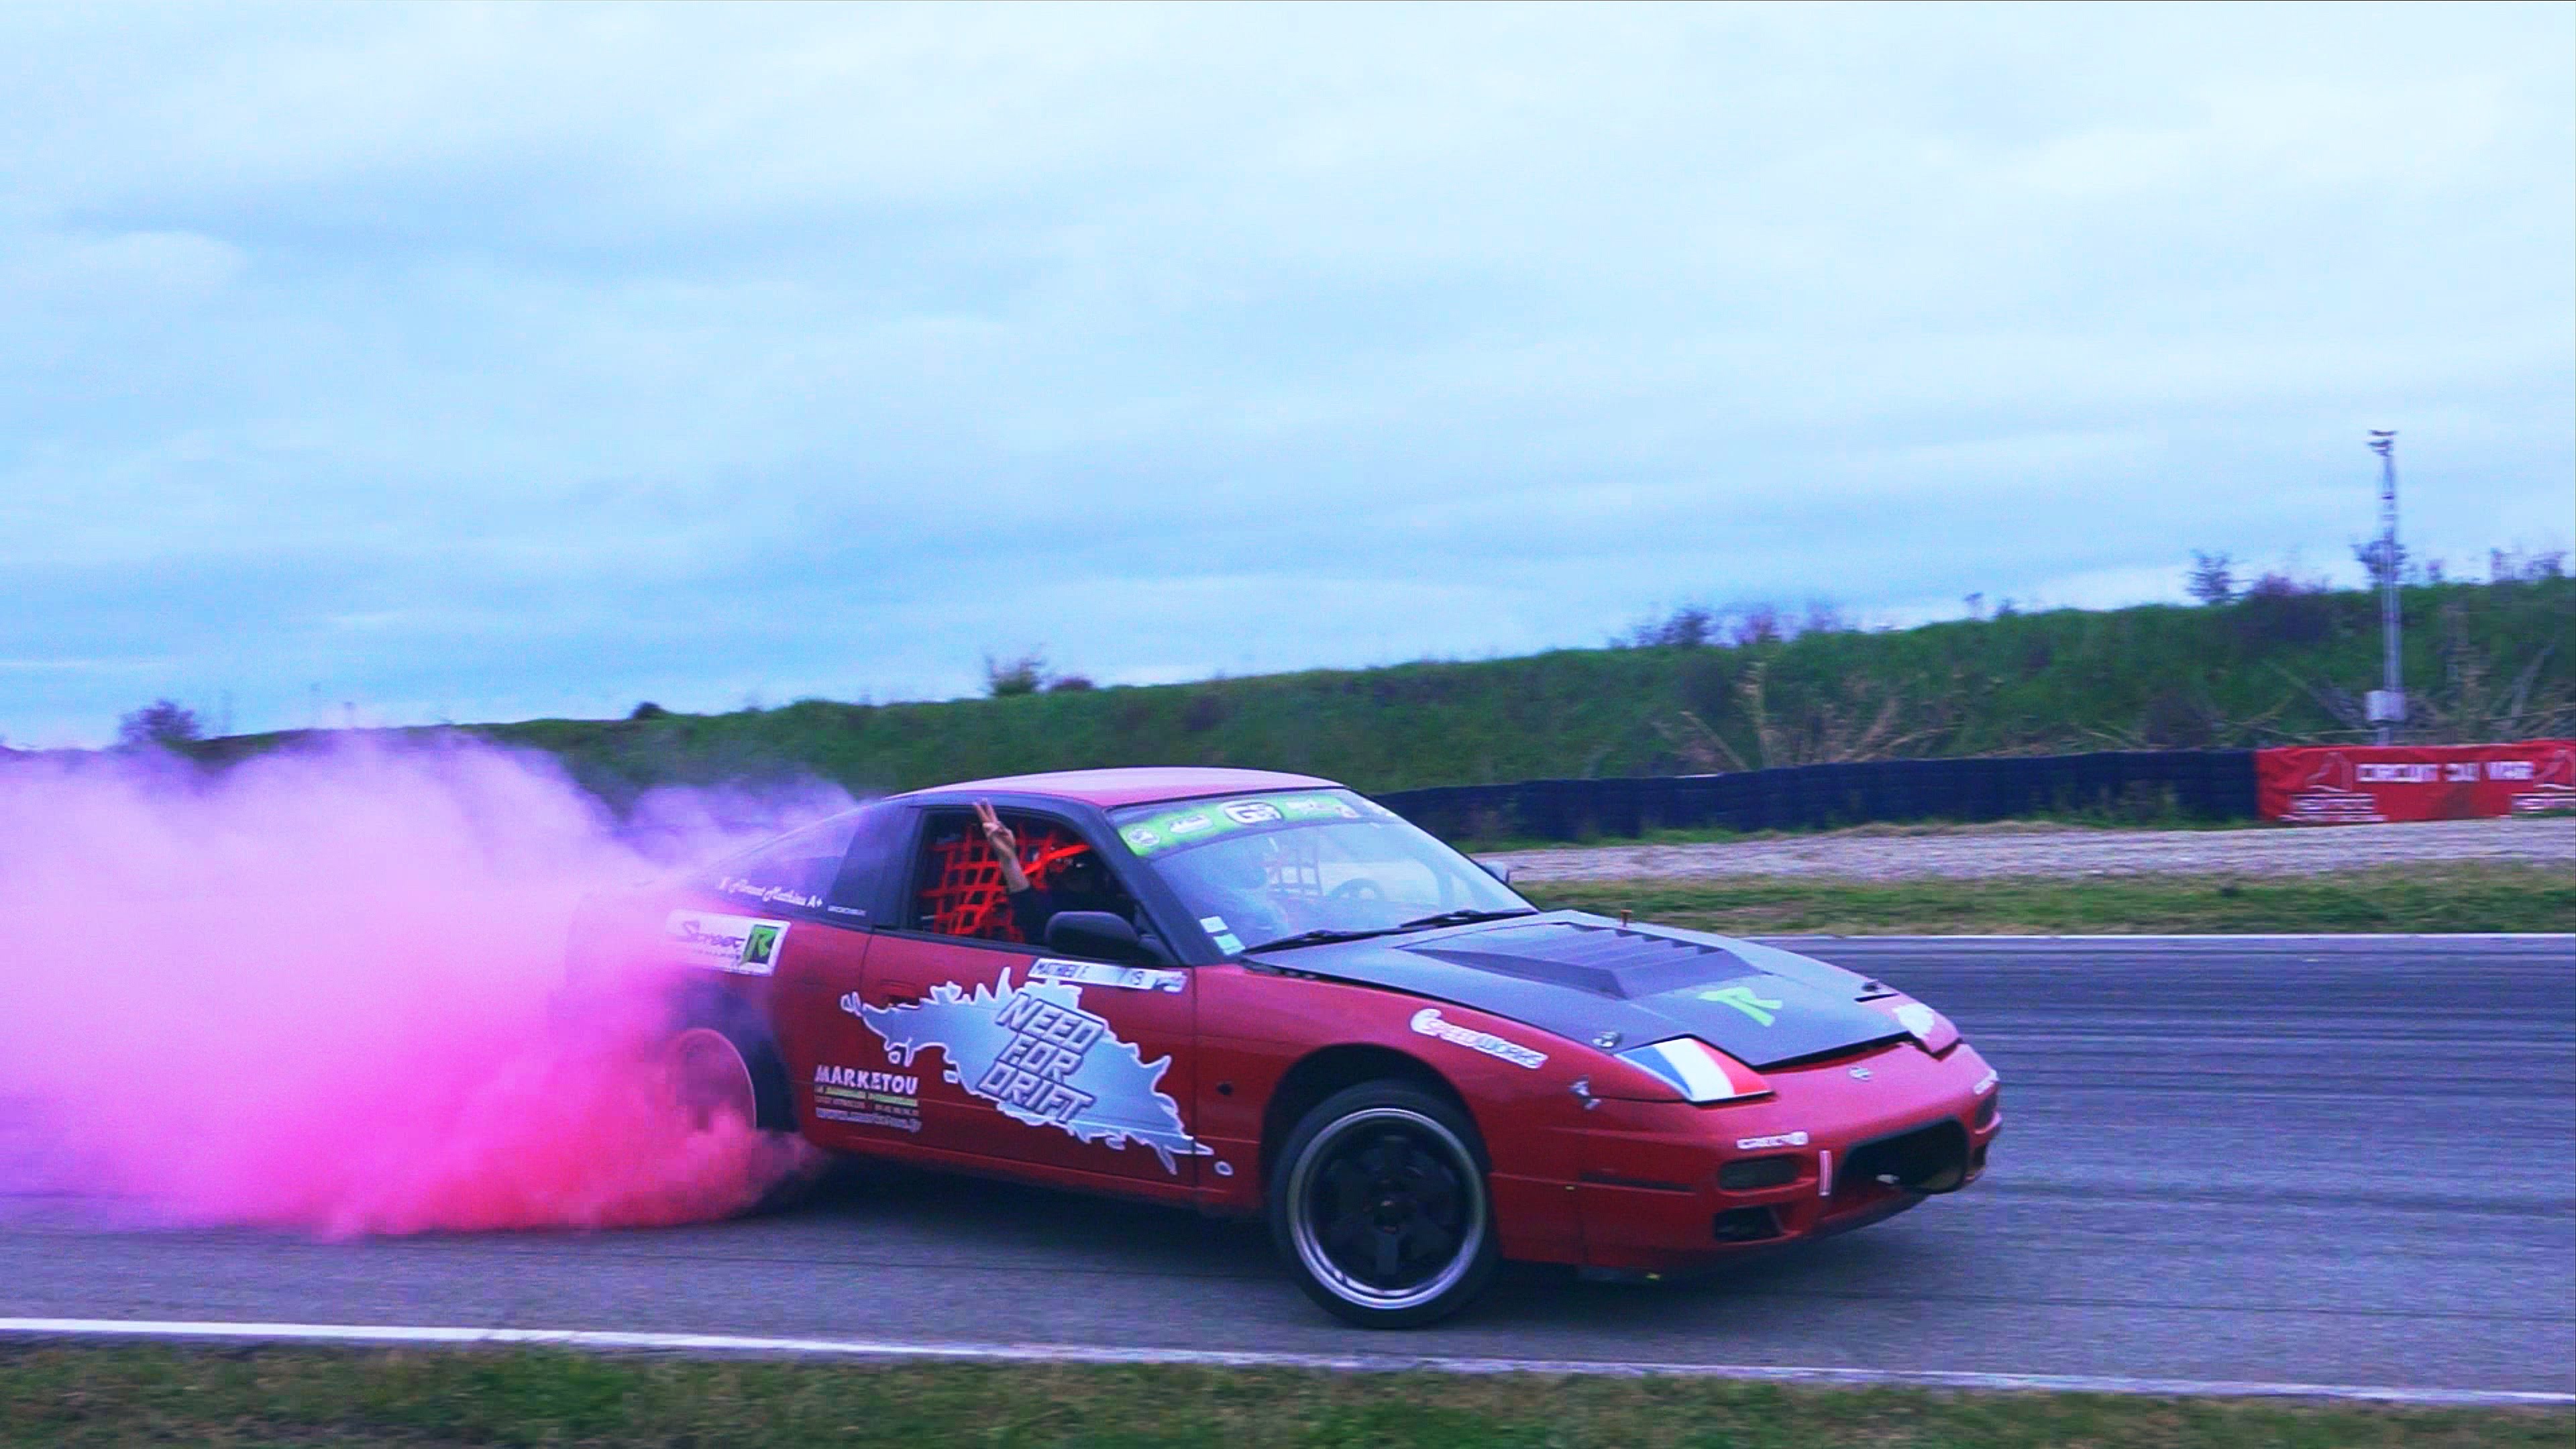 Florent Mathieu : DRIFT S13 V8 4.4L / Red Colored Smoke Tires - YouTube